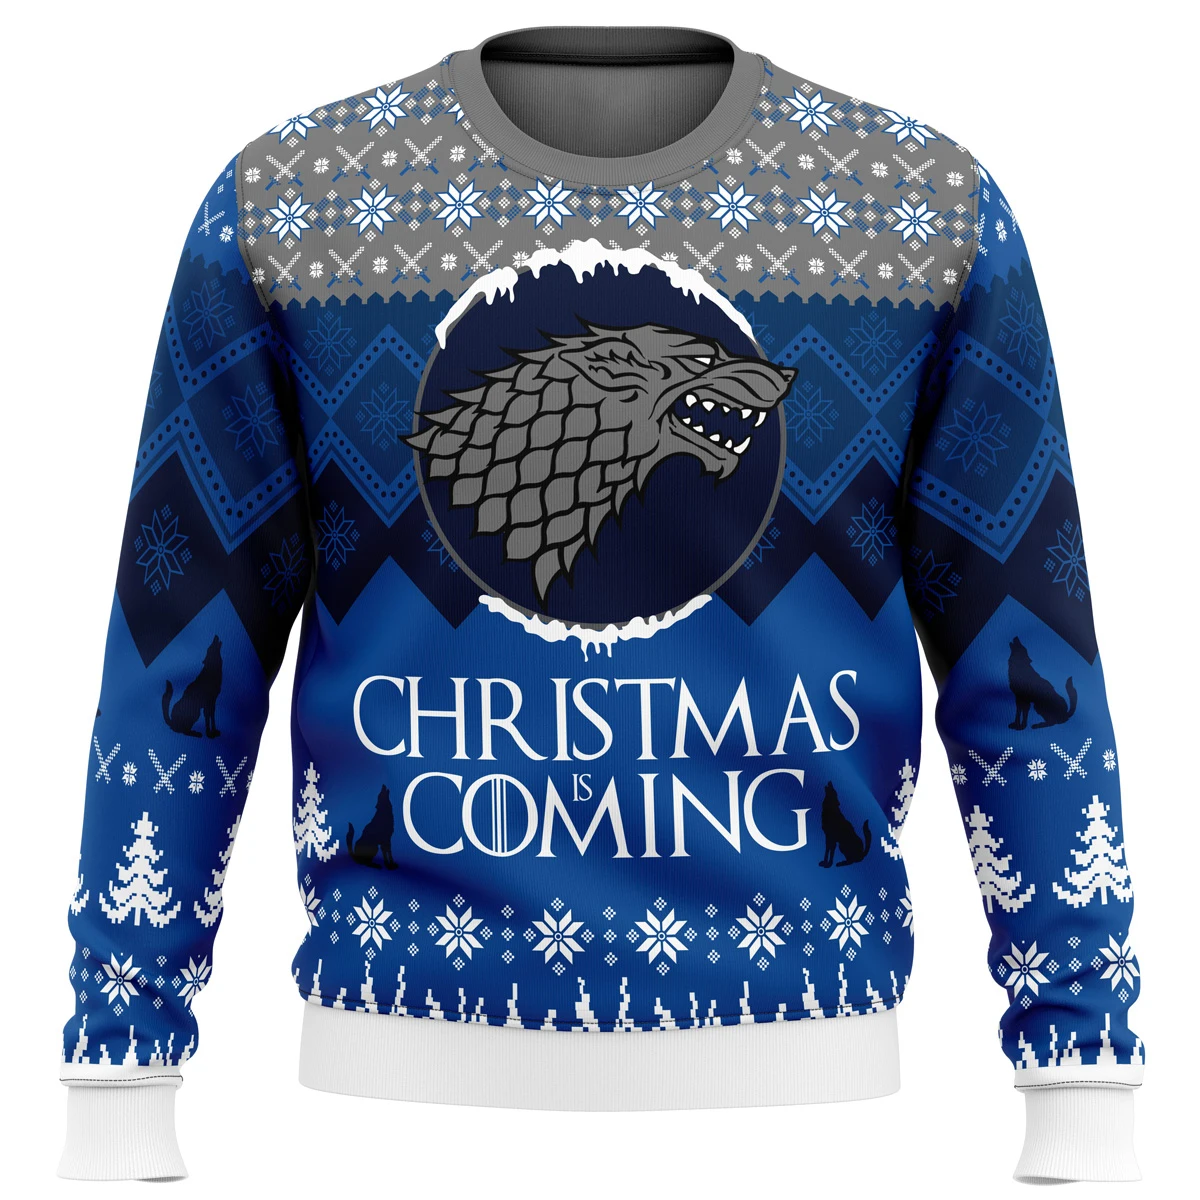 Game Of Thrones Christmas Is Coming Ugly Christmas Sweatshirt Gift Santa Claus Pullover Autumn Winter Men - Game Of Thrones Shop